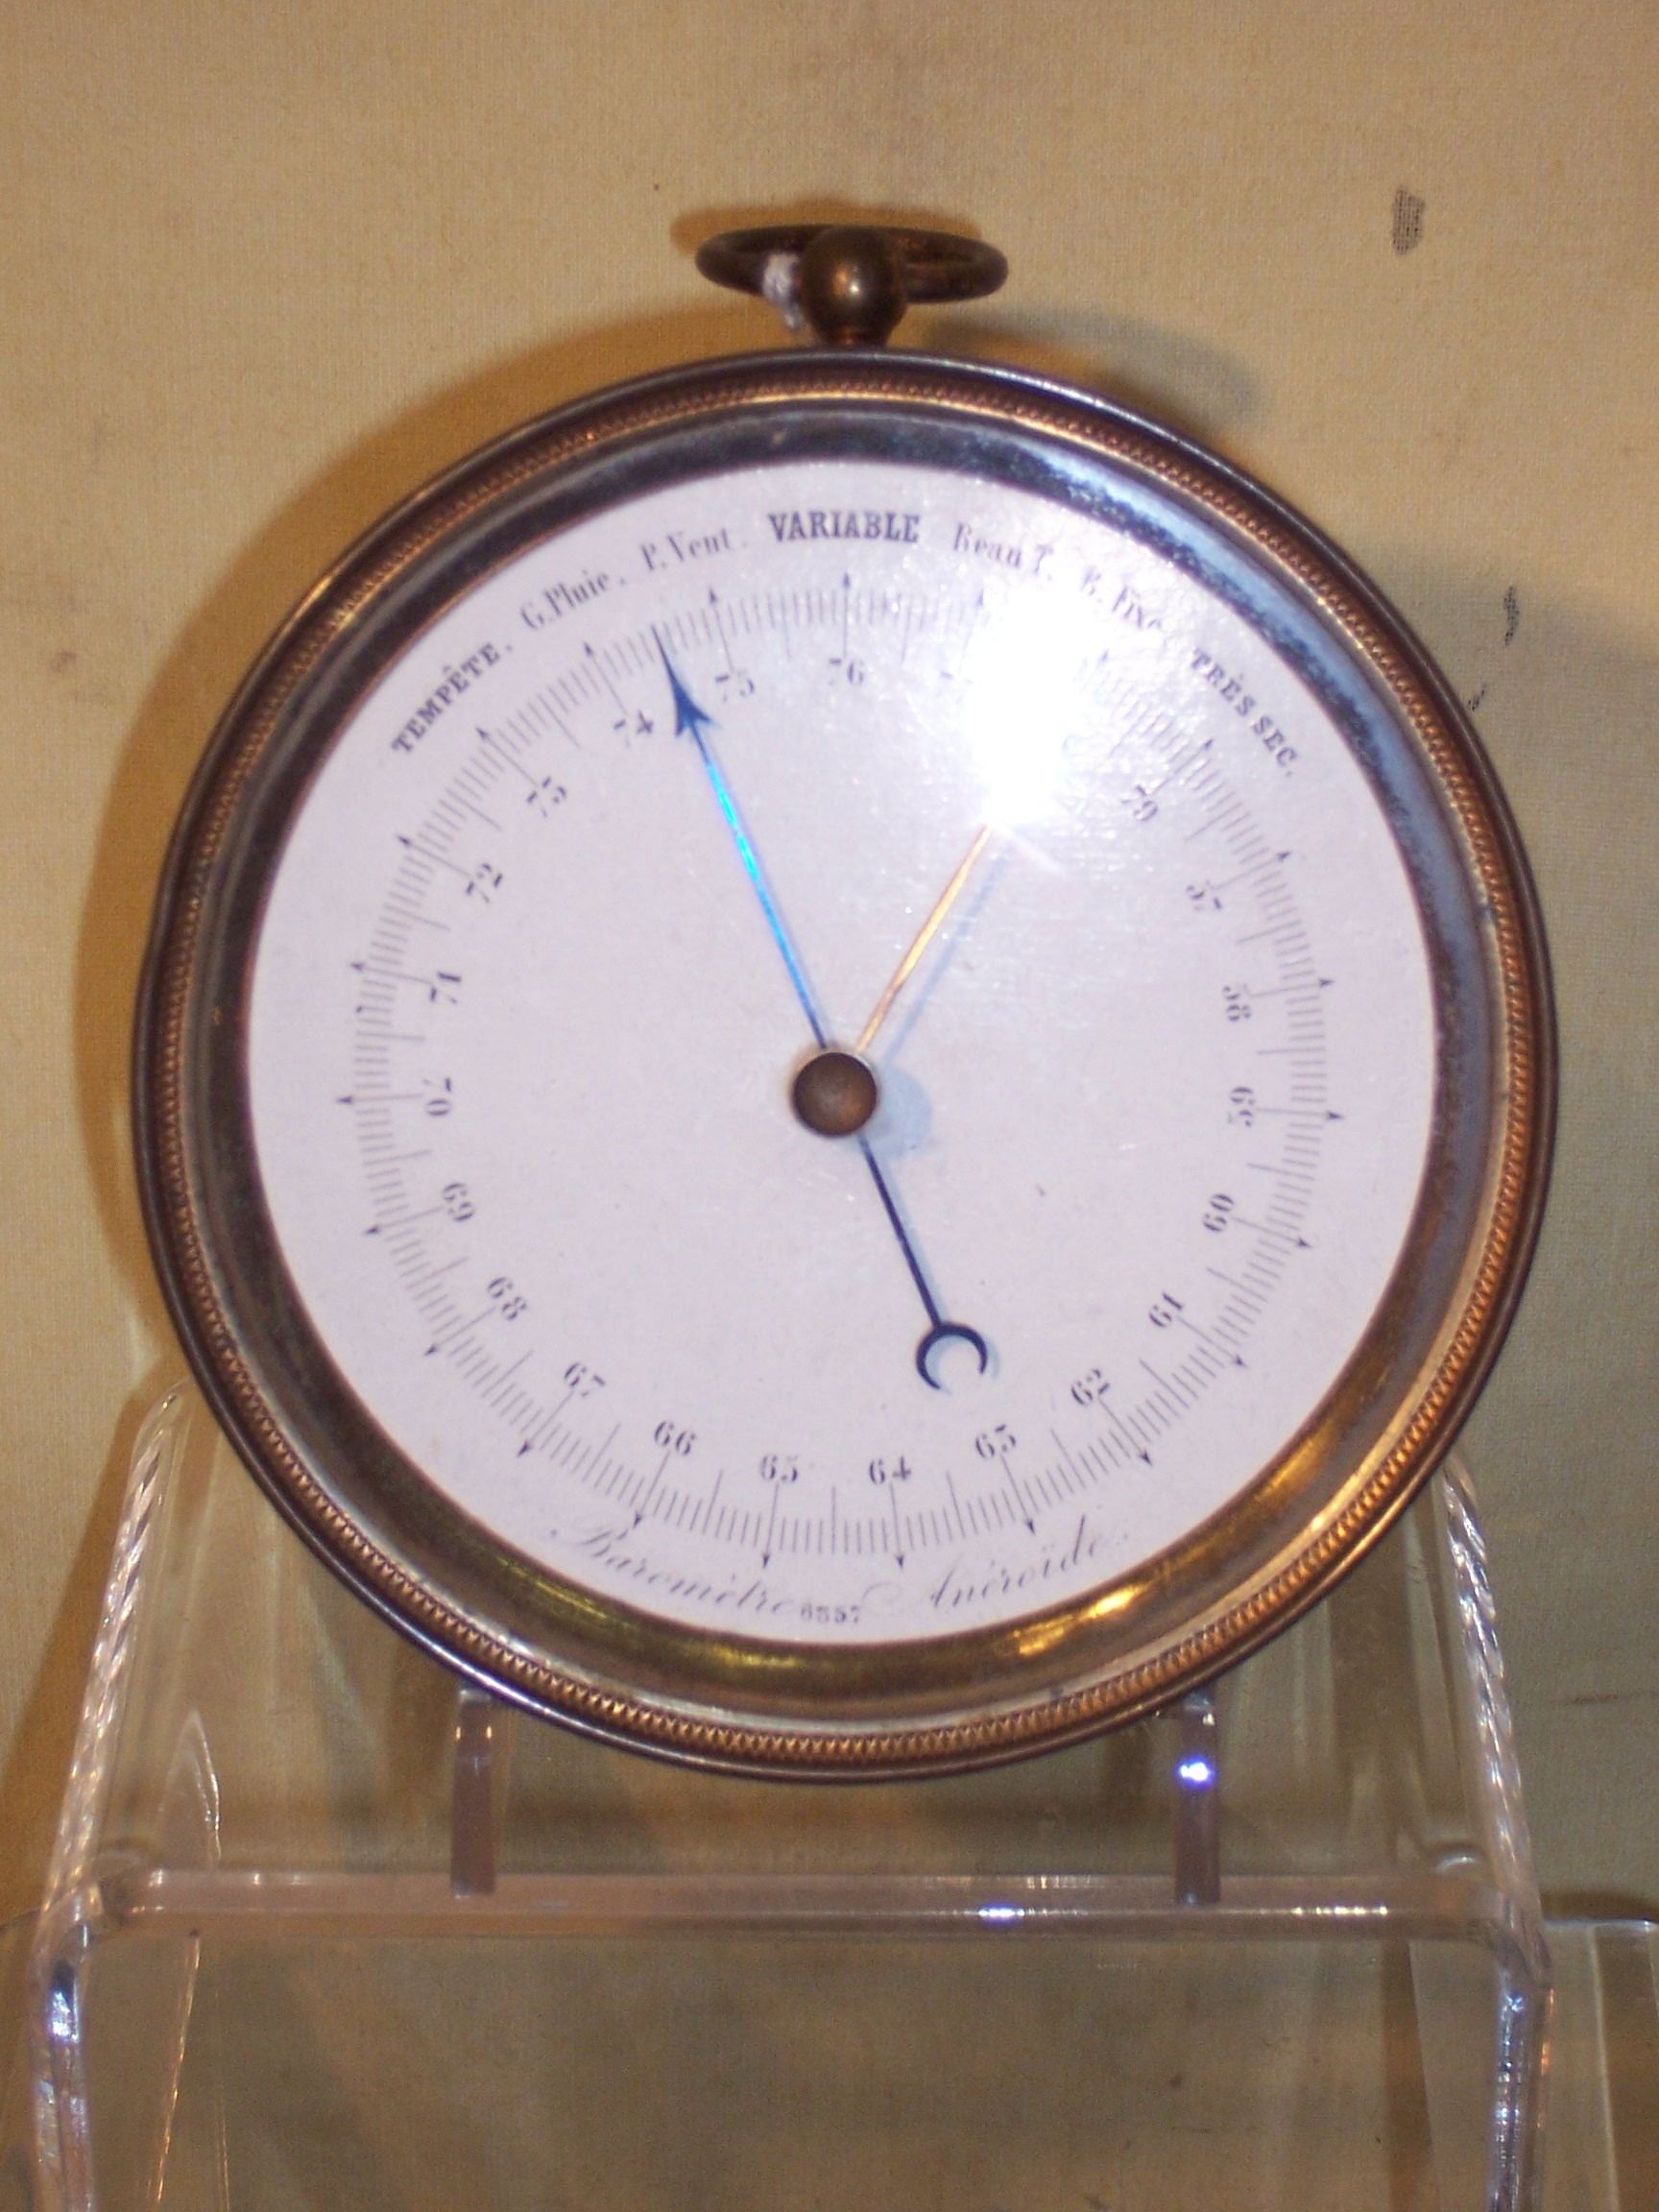 A452 Aneroid Barometer